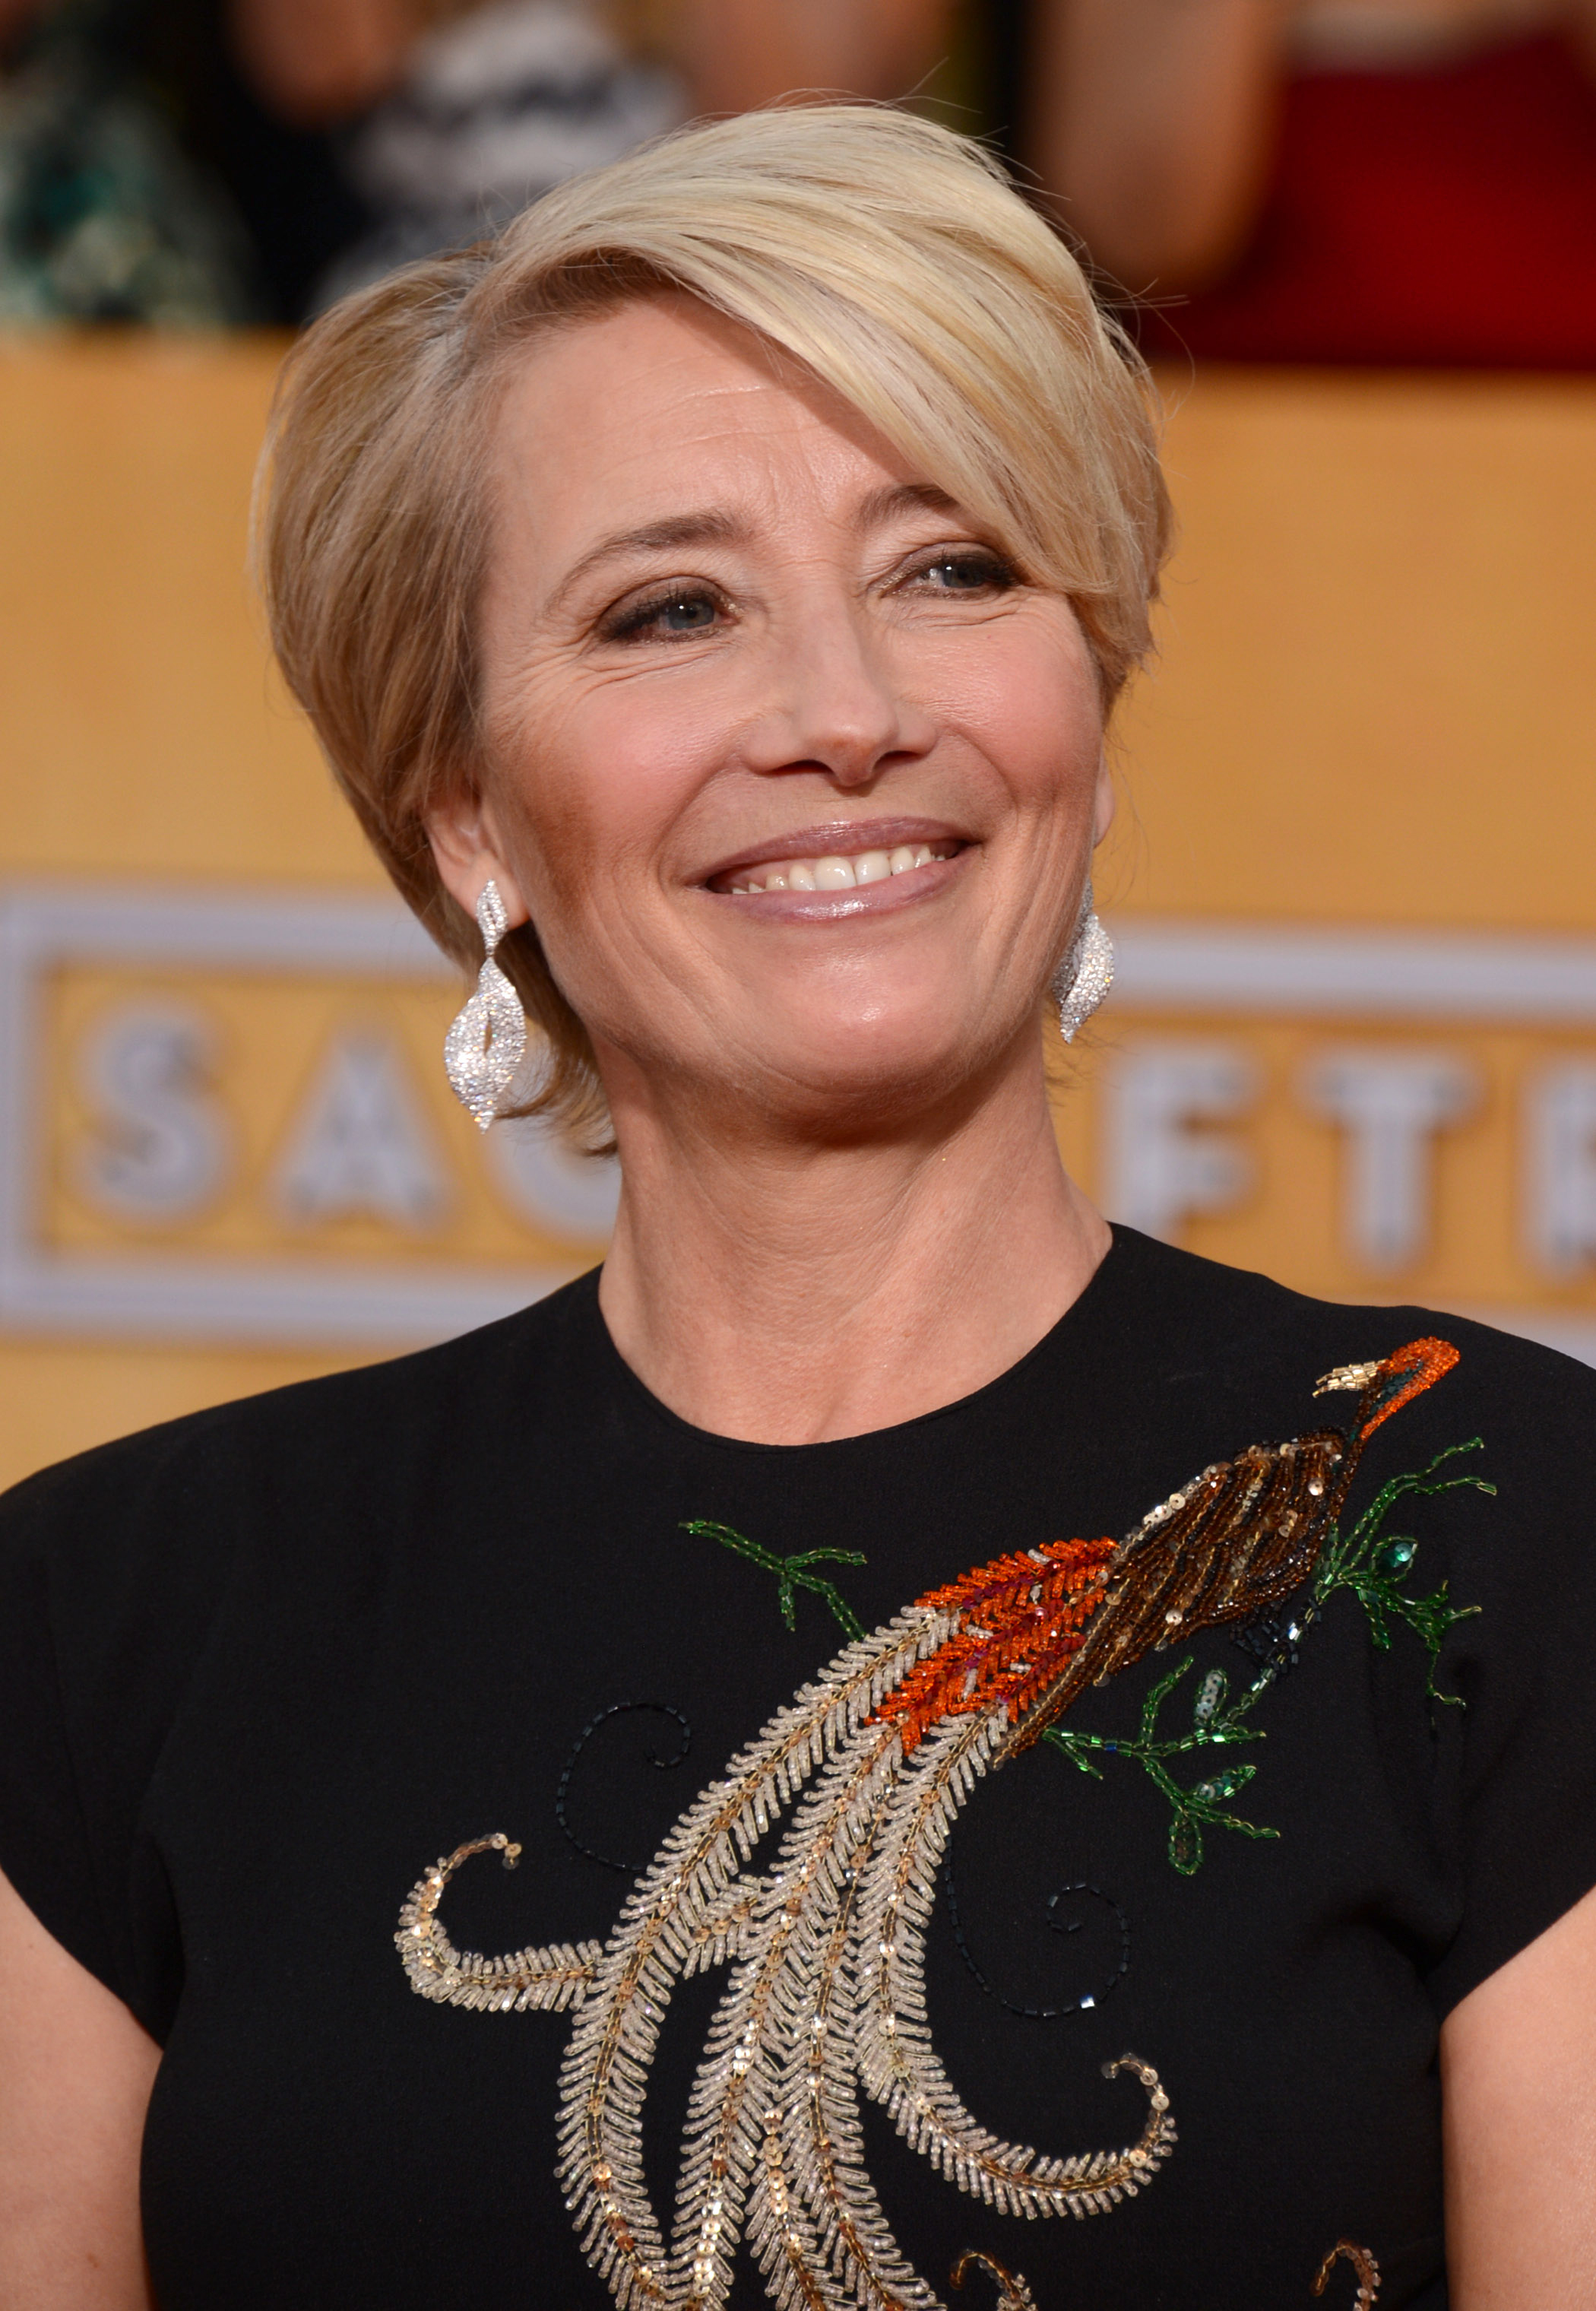 Emma Thompson arrives at the 20th annual Screen Actors Guild Awards at the Shrine Auditorium on Jan. 18, 2014, in Los Angeles. (Jordan Strauss—Invision/AP)